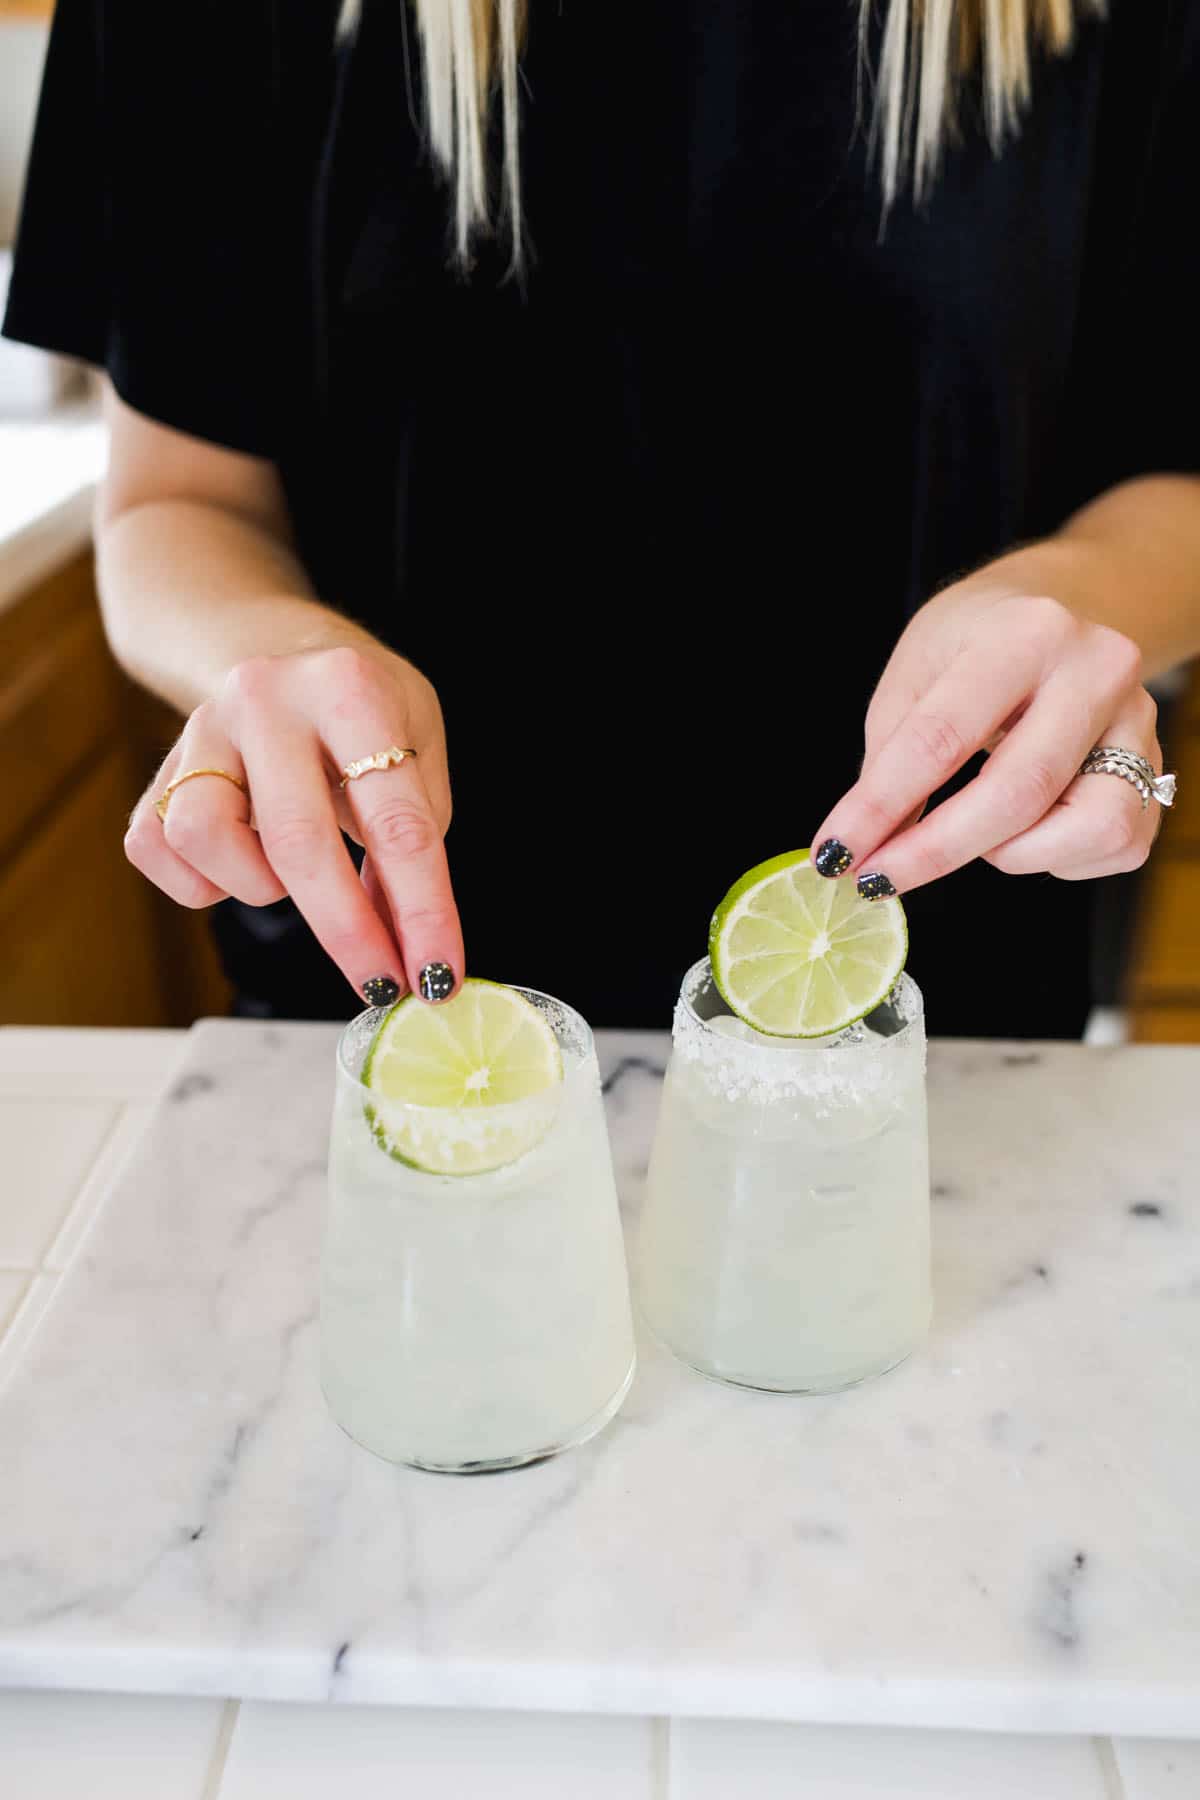 Woman adding lime wheels to two glasses full of margaritas on a counter.